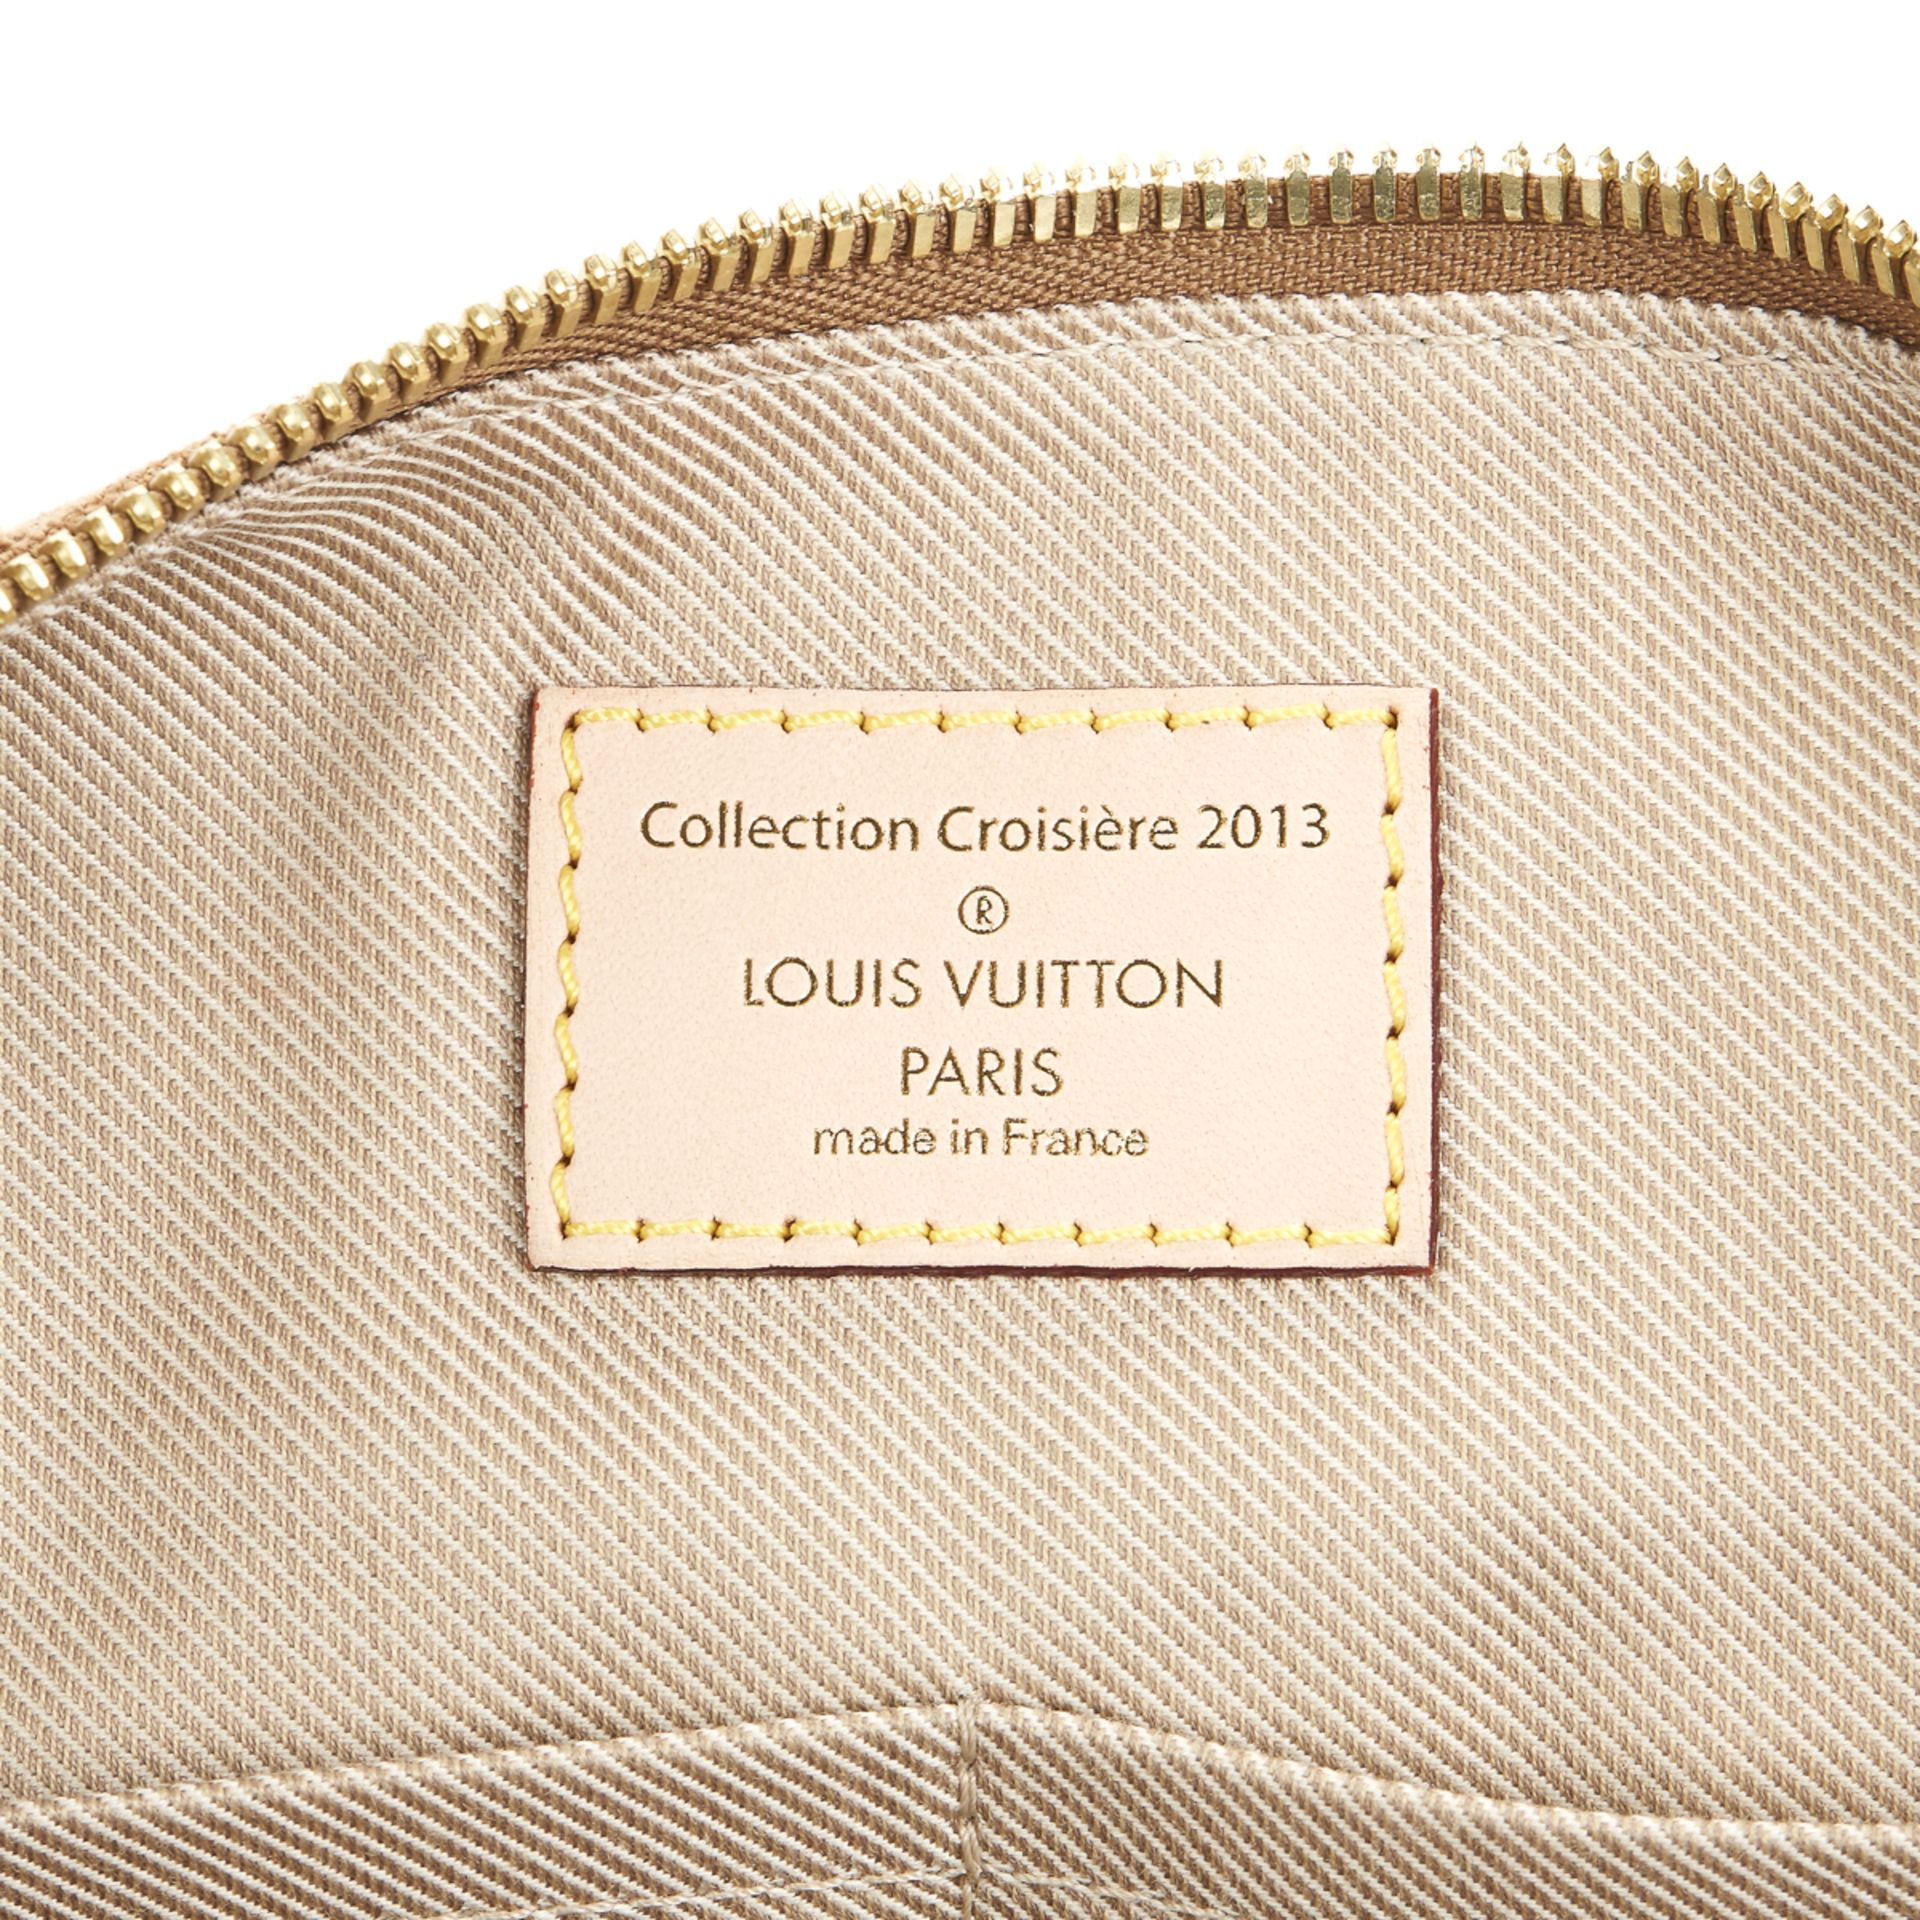 LOUIS VUITTON Speedy 35 Bandouliere - Image 7 of 10